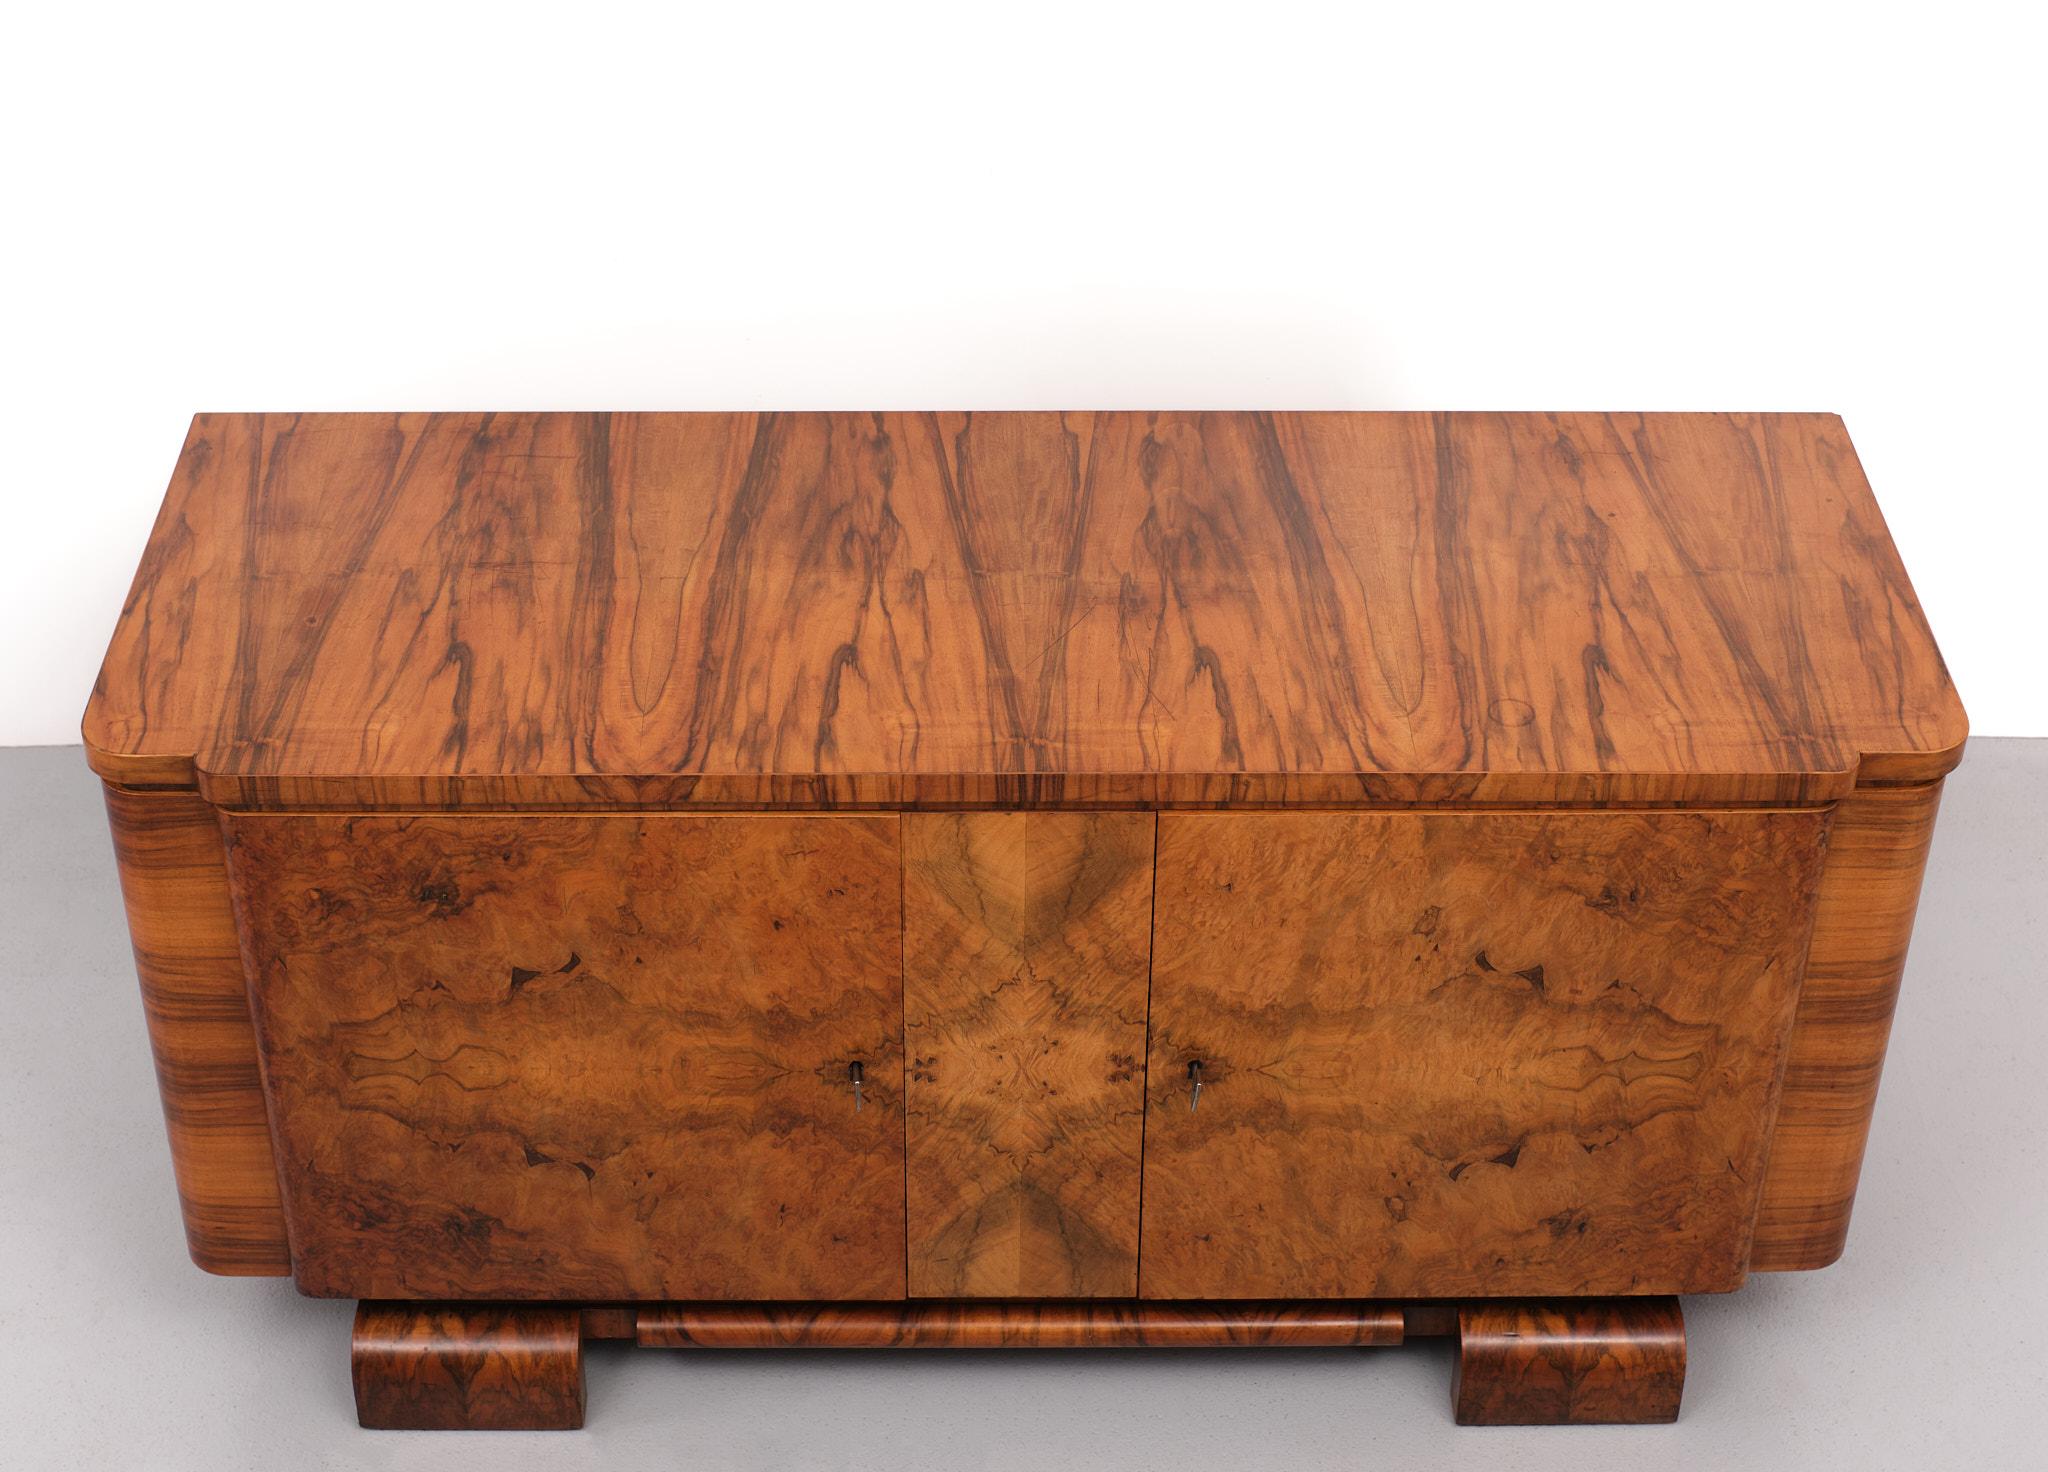 Beathiful Art Deco sideboard. Superb book matched walnut burl veneer. On the front.
Love all its curves. Original working keys. One shelve. Great details on this piece. 
Normal users marks on the top.